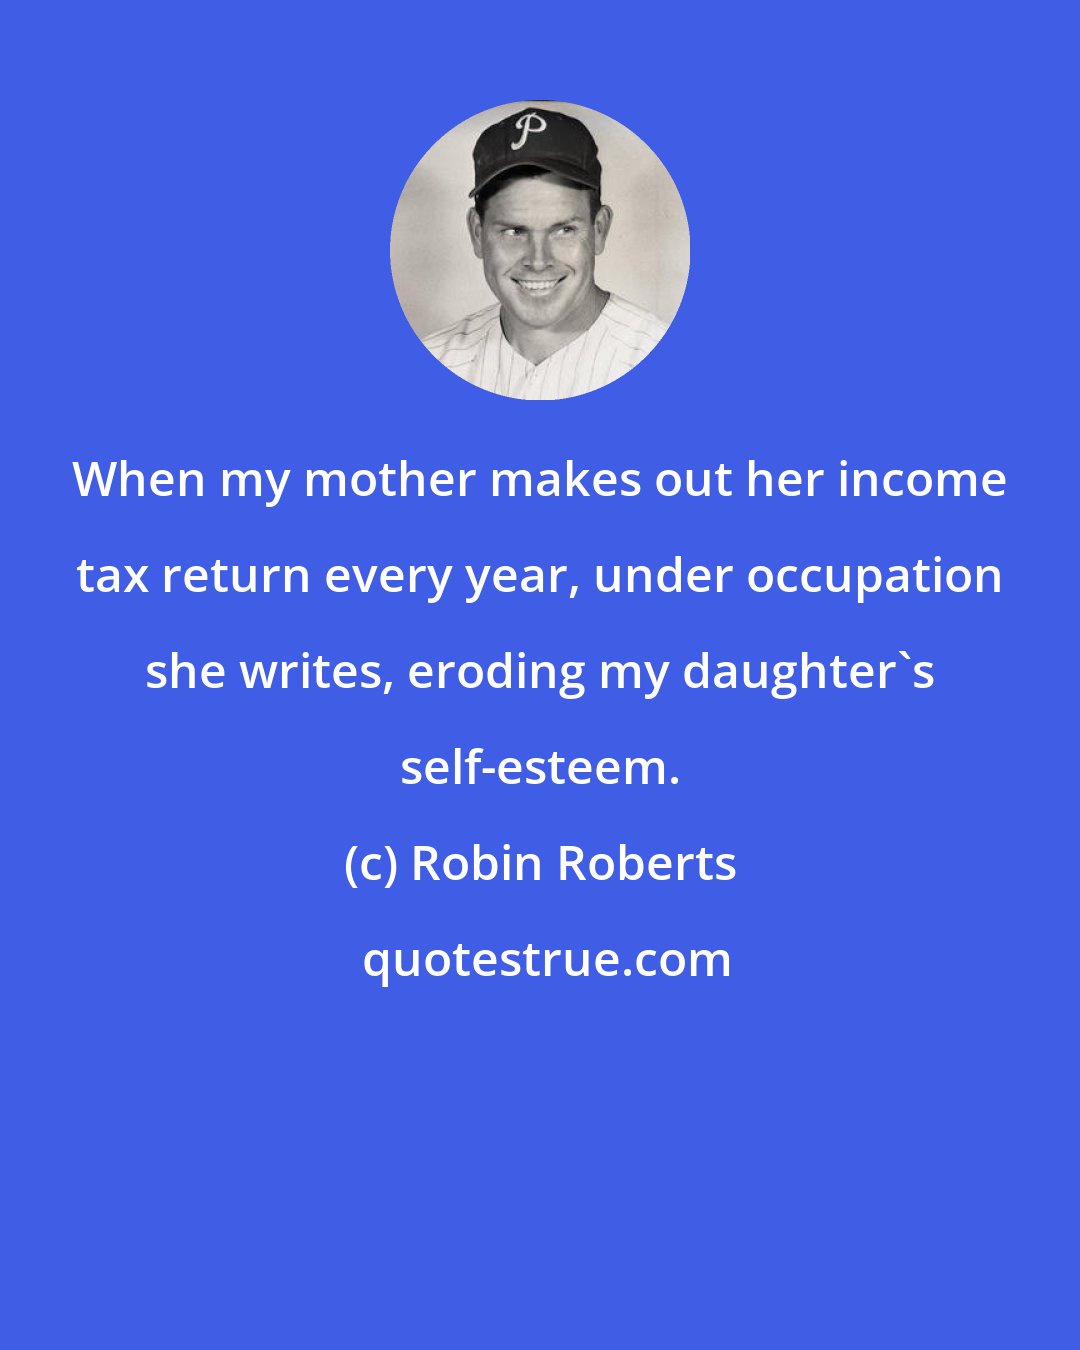 Robin Roberts: When my mother makes out her income tax return every year, under occupation she writes, eroding my daughter's self-esteem.